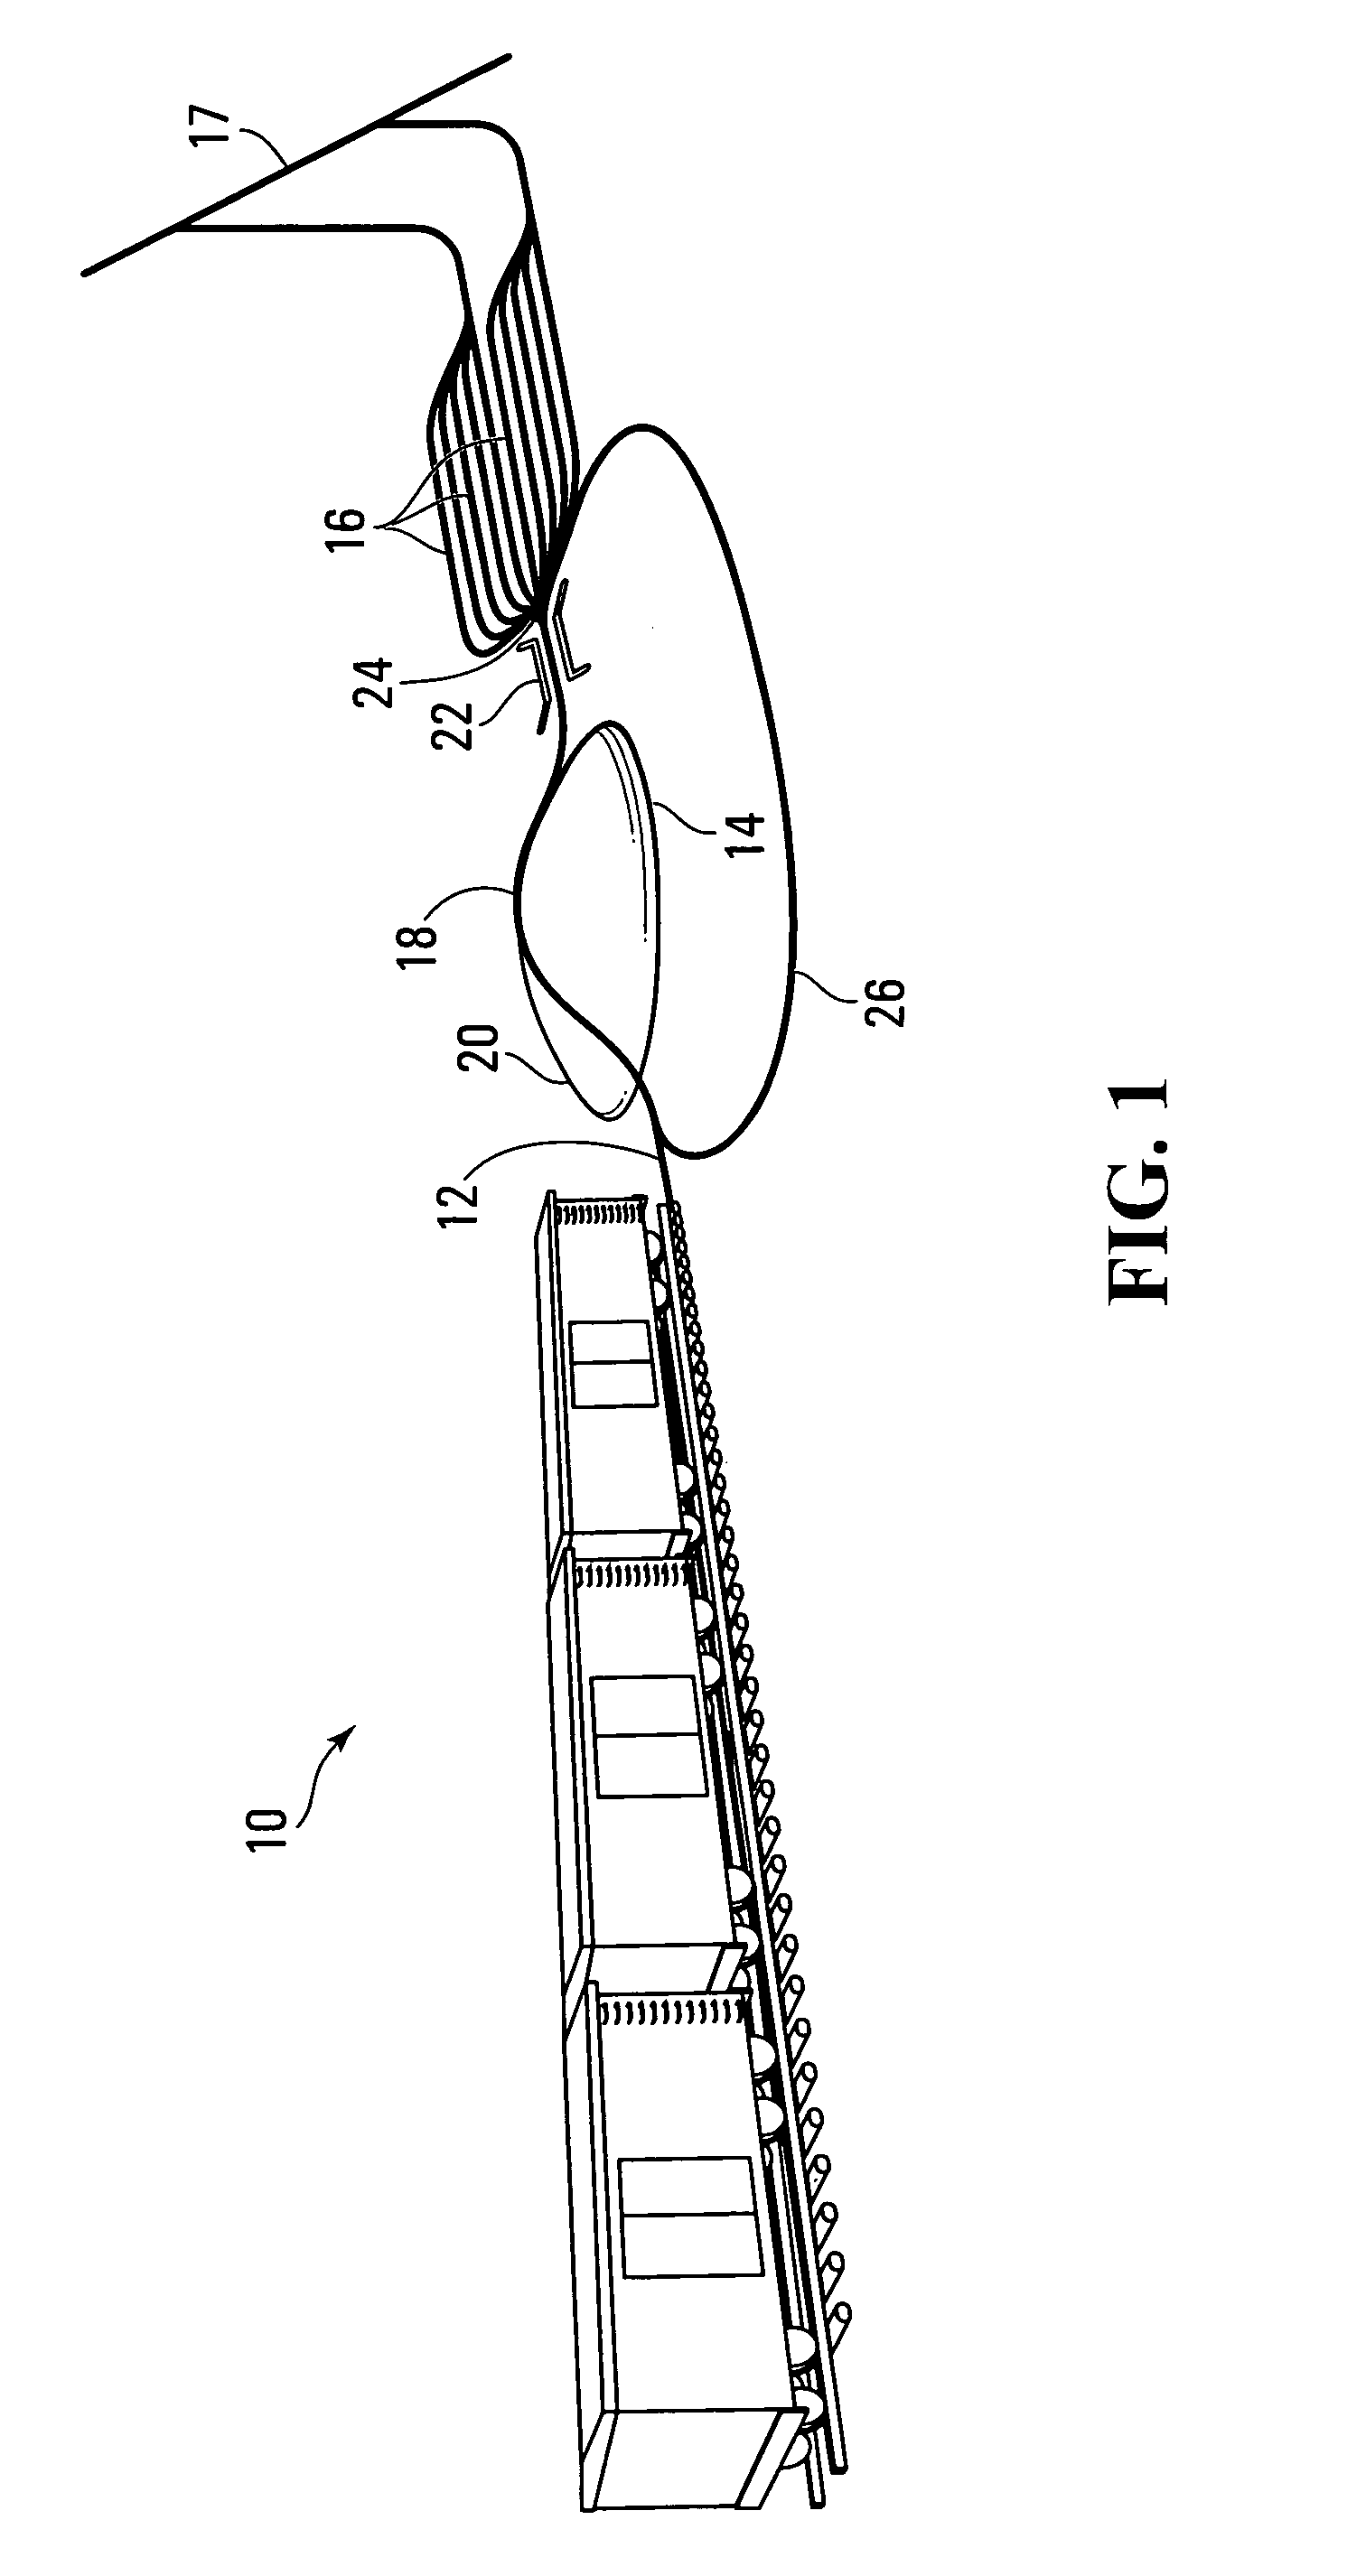 Method and system for computing rail car switching solutions in a switchyard based on expected switching time